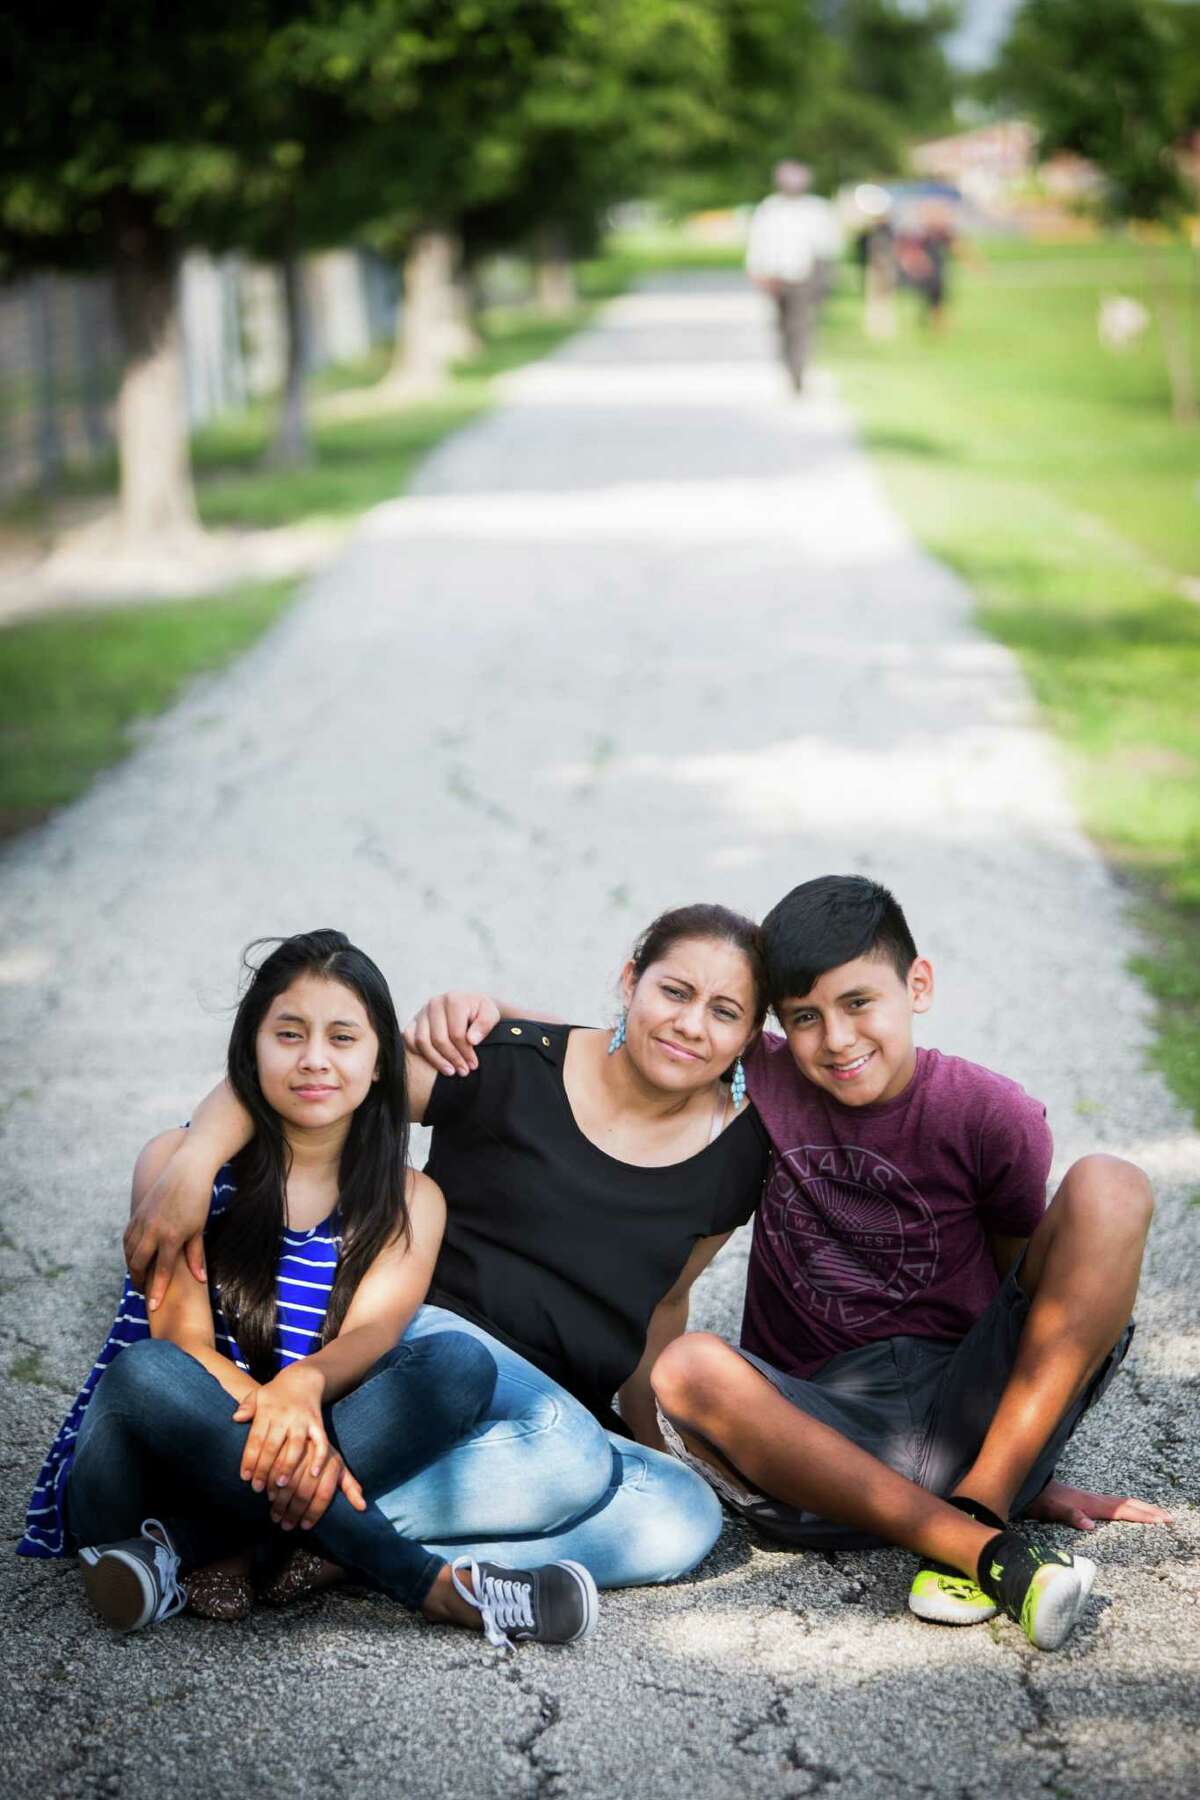 Patricia Salazar, came to the United States from Honduras eight years ago to seek a better future for her children, Linneth, 13, left, and Maykol, 14.